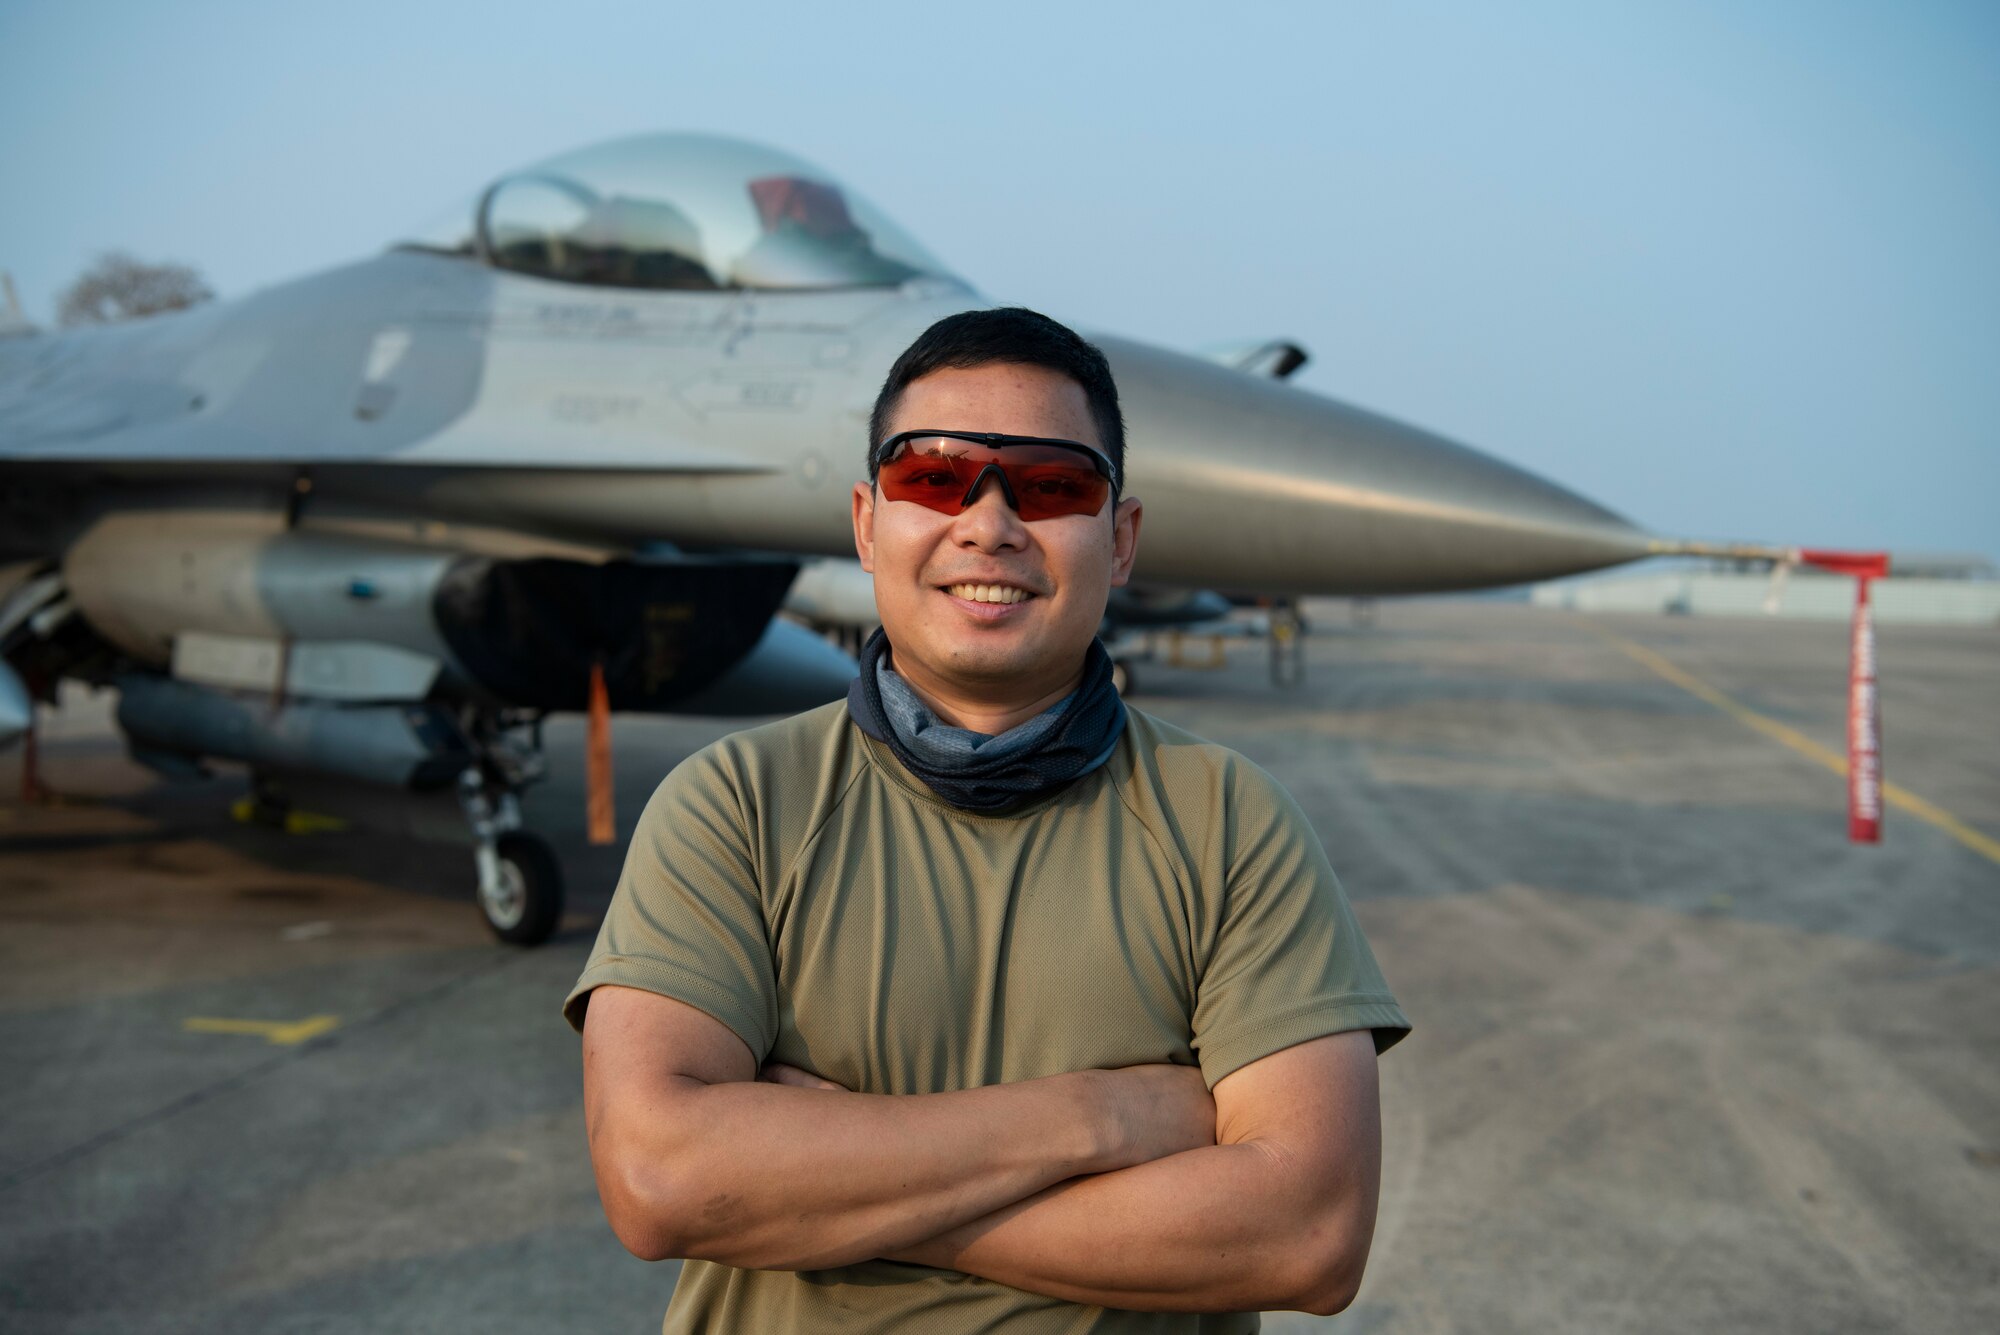 Airman poses for a photo